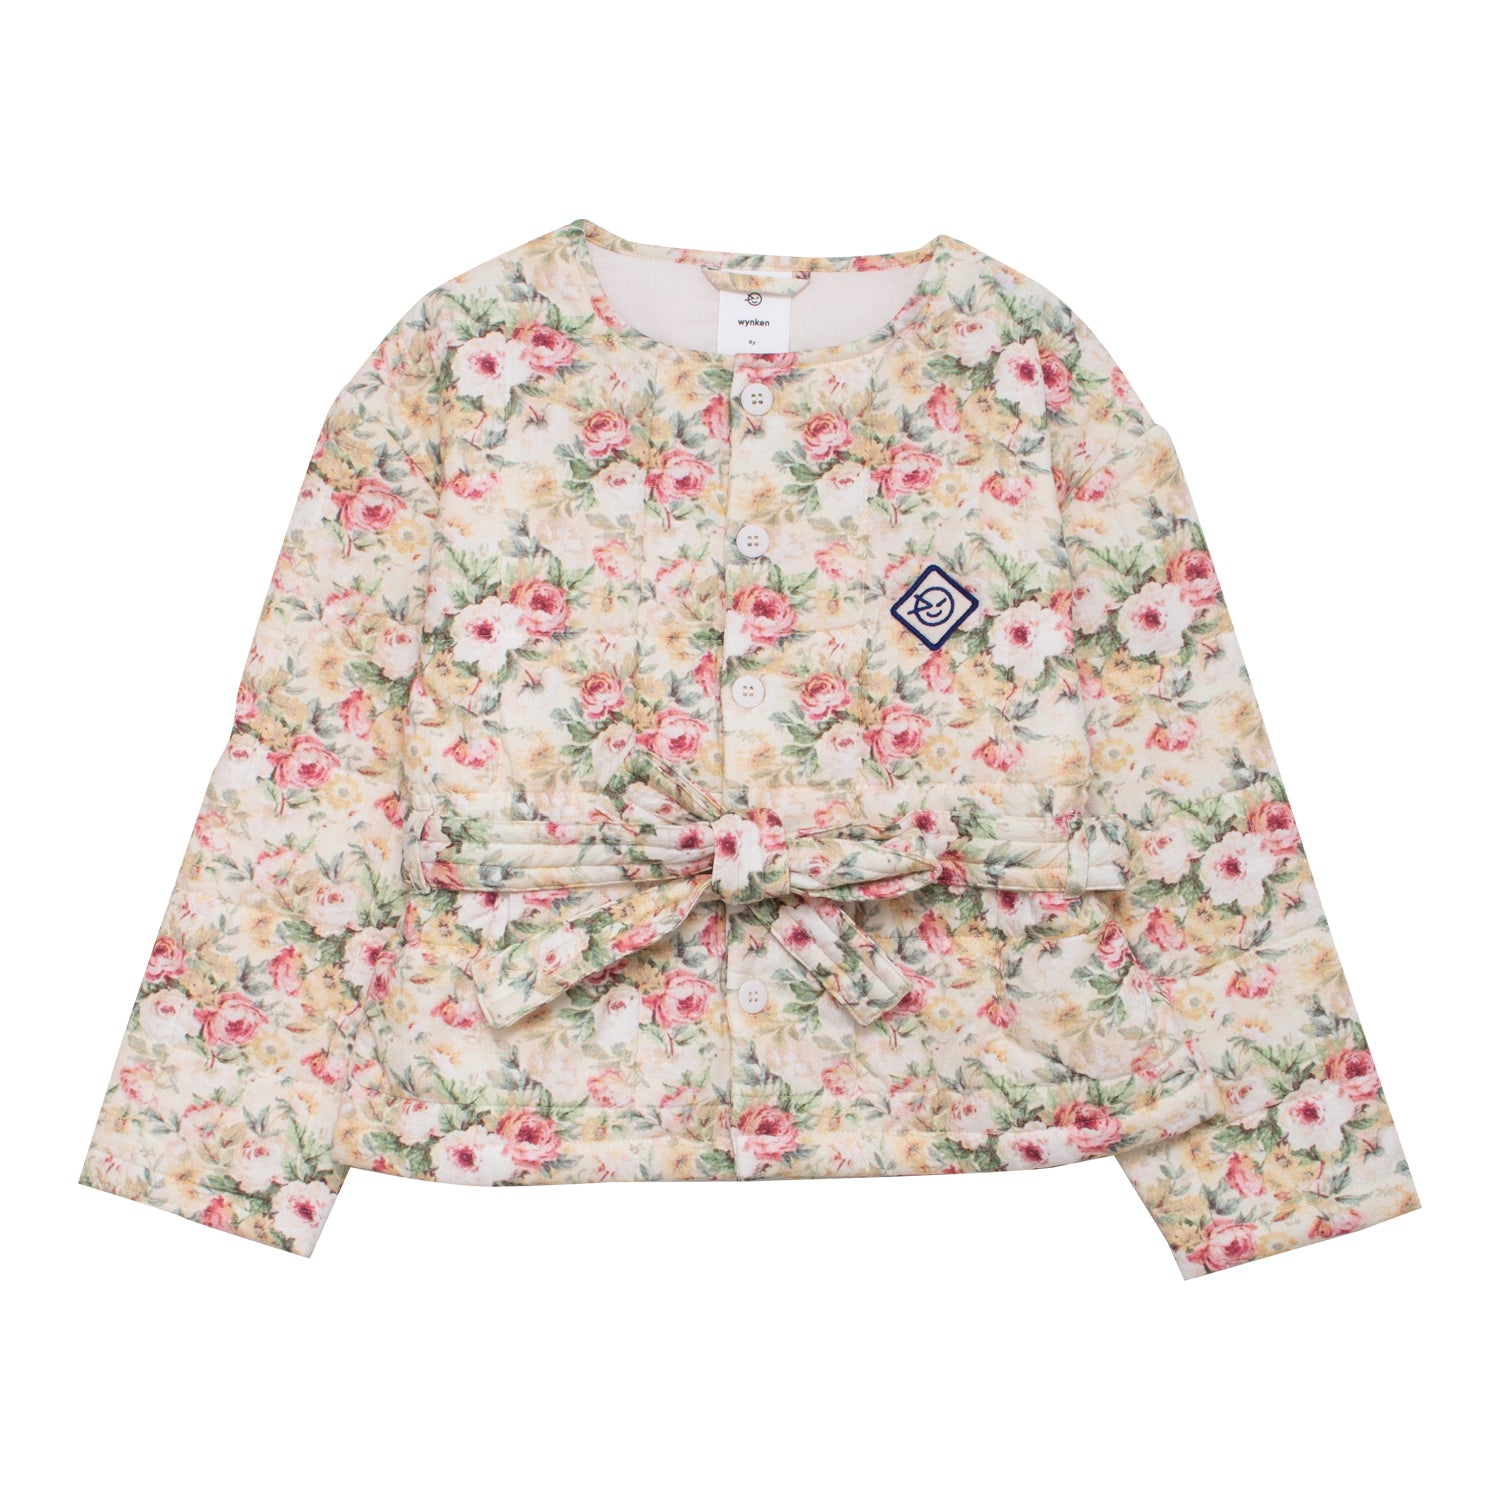 Tatto Jacket - Floral